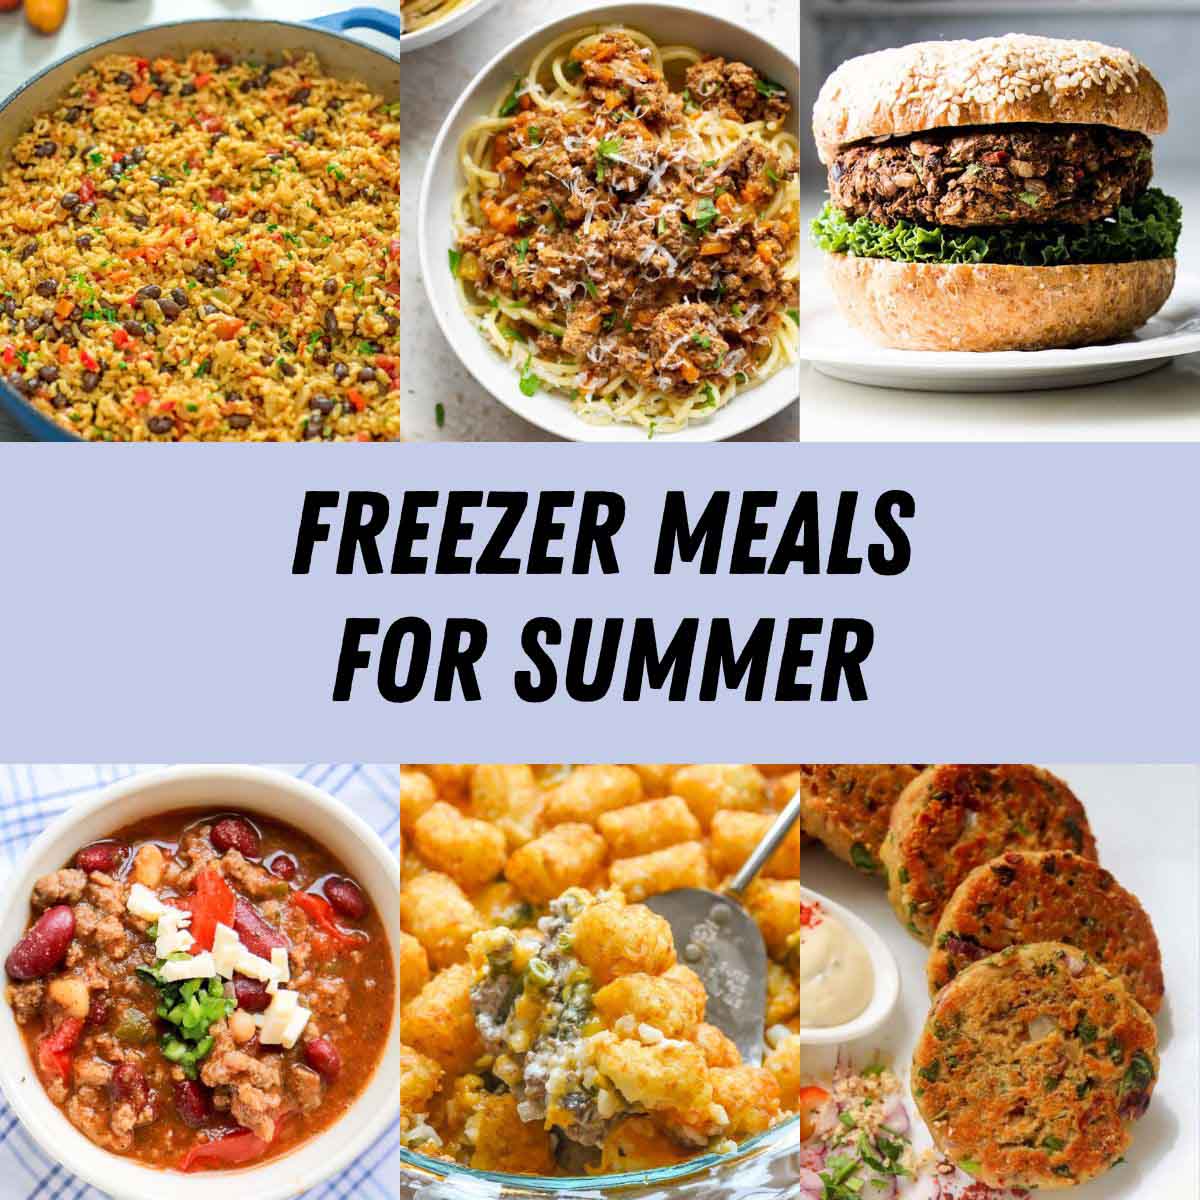 Thumbnail of freezer meals for summer.